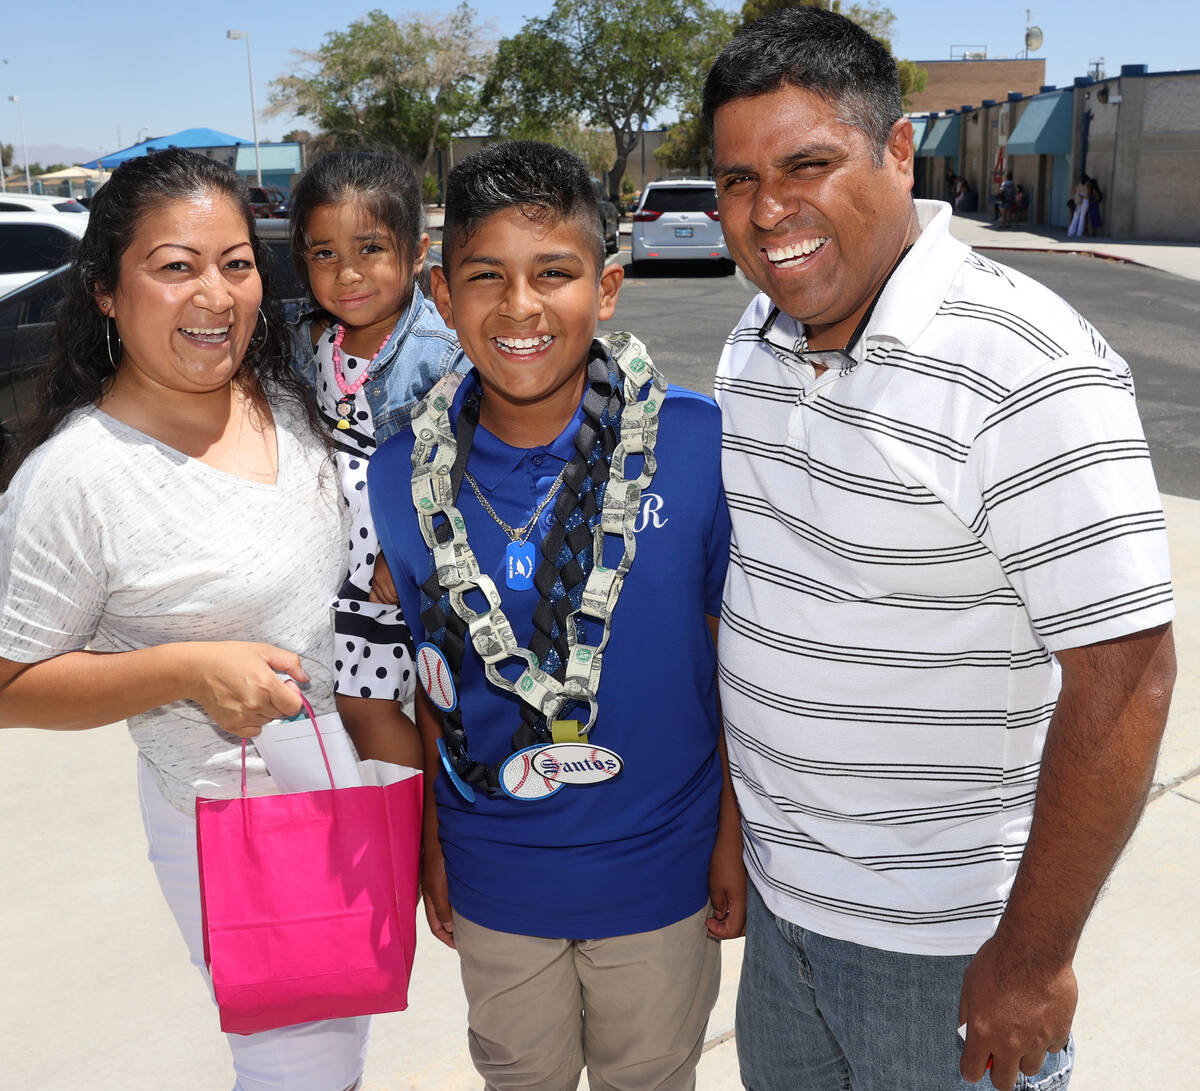 Fifth grade graduate Santos Marin, 10, shows off his money lei with his family, mom Lourdes, si ...